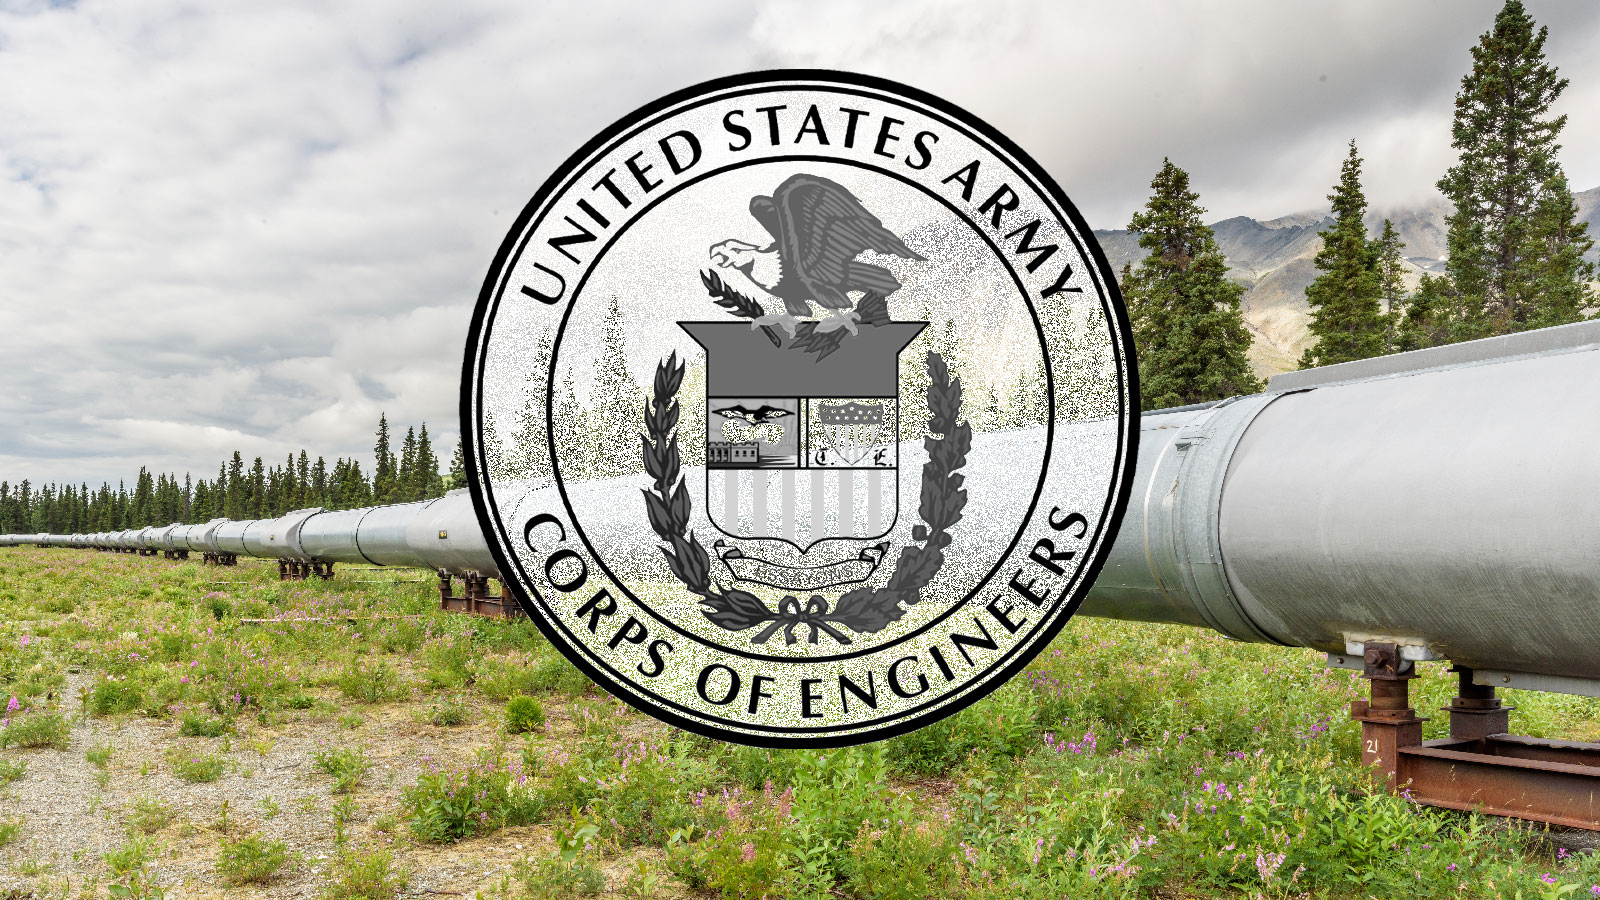 United States Army Corps of Engineers logo on top of a photo of a pipeline